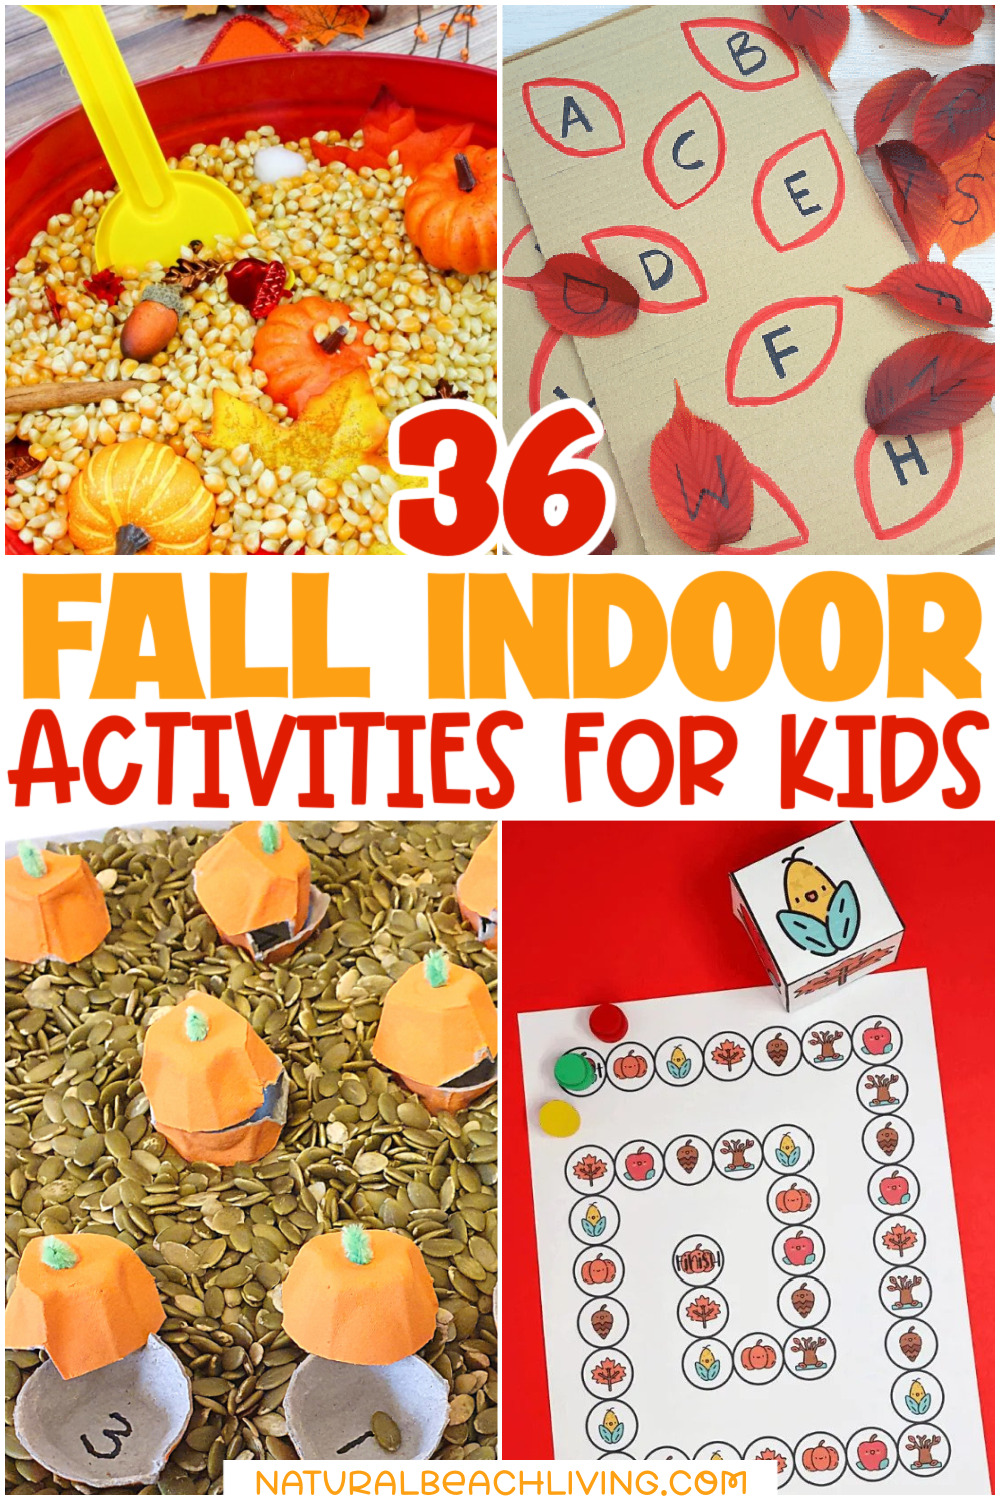 37 Best Fall Indoor Activities for the Whole Family